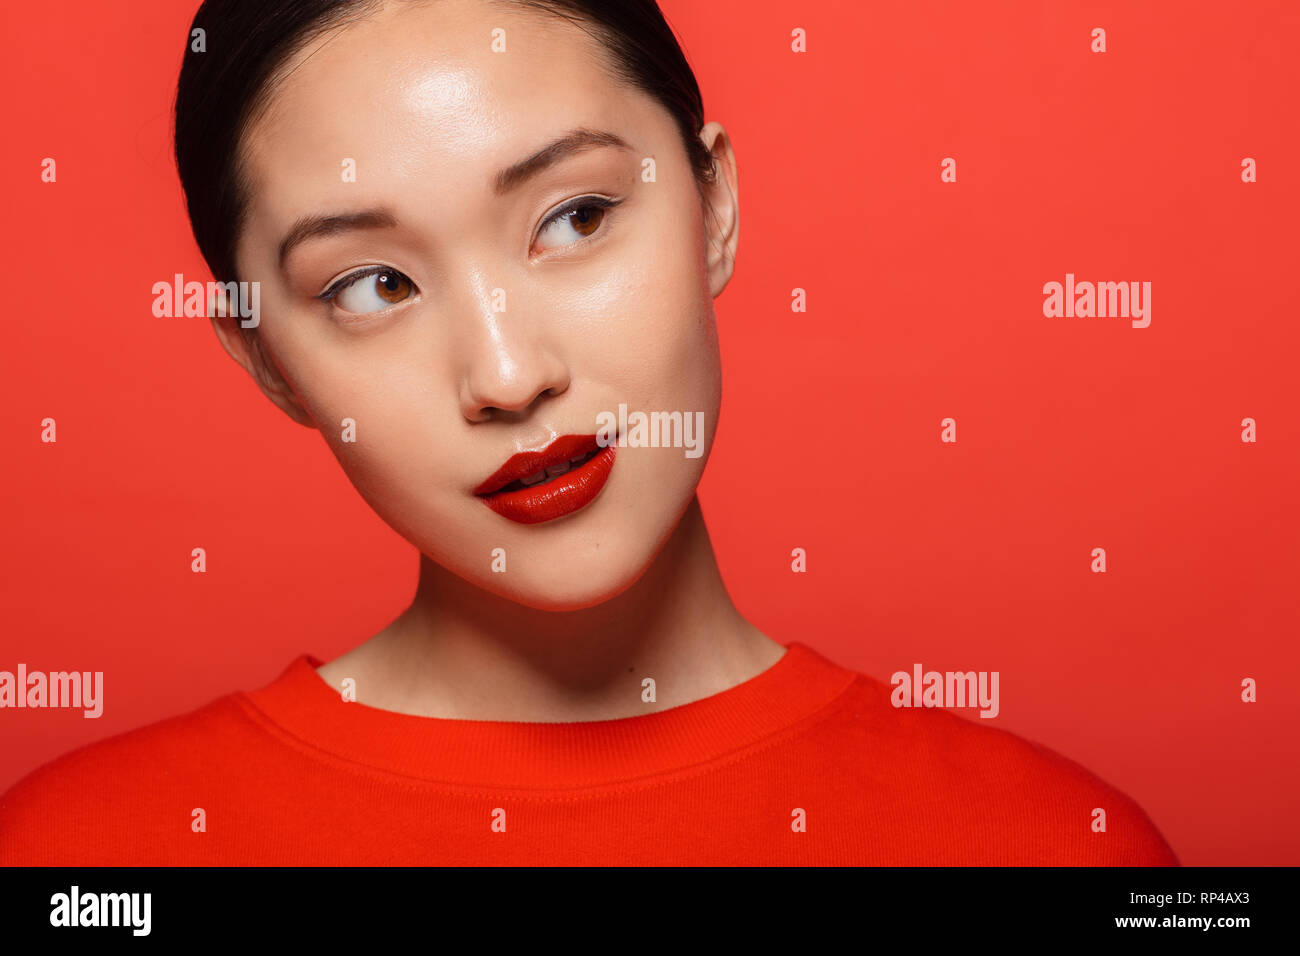 Close up of young asian woman with beautiful make up looking away and thinking. Korean female model with red make up against red background. Stock Photo